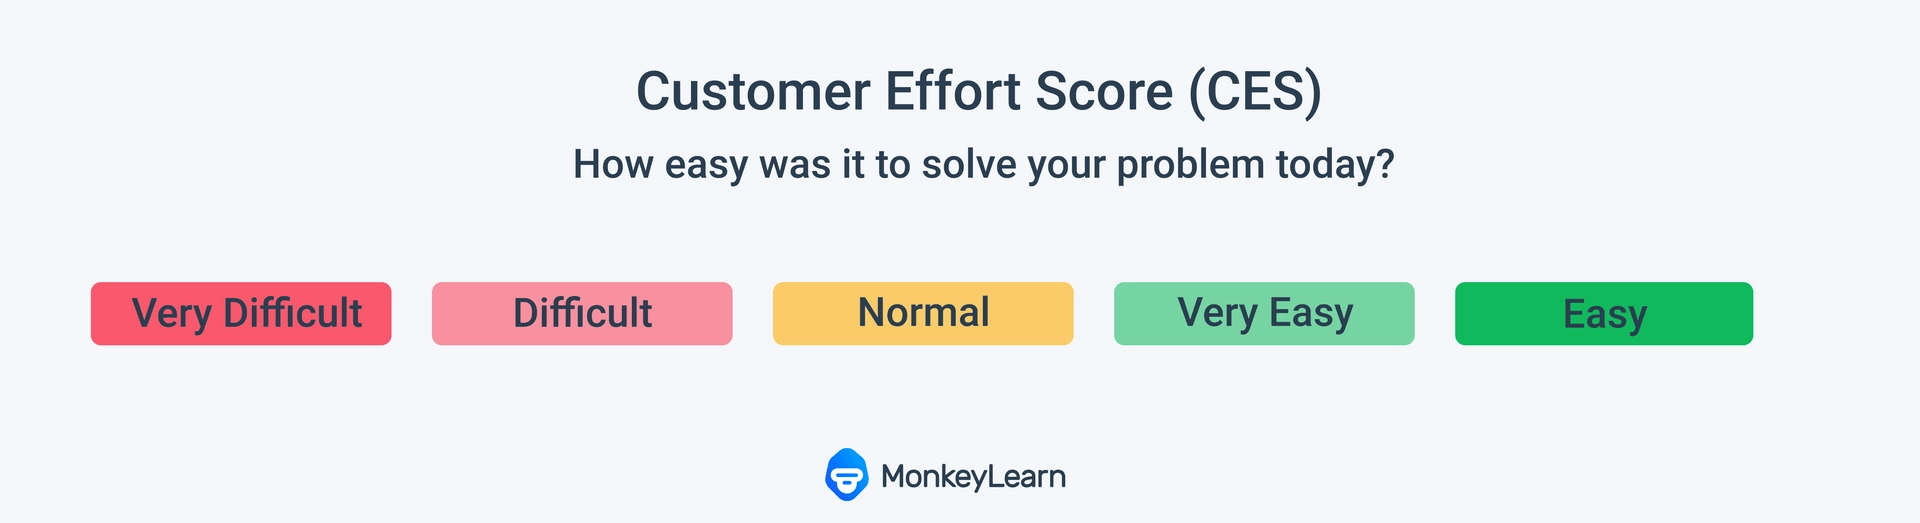 Customer Effort Score- How easy was it to solve your problem today.